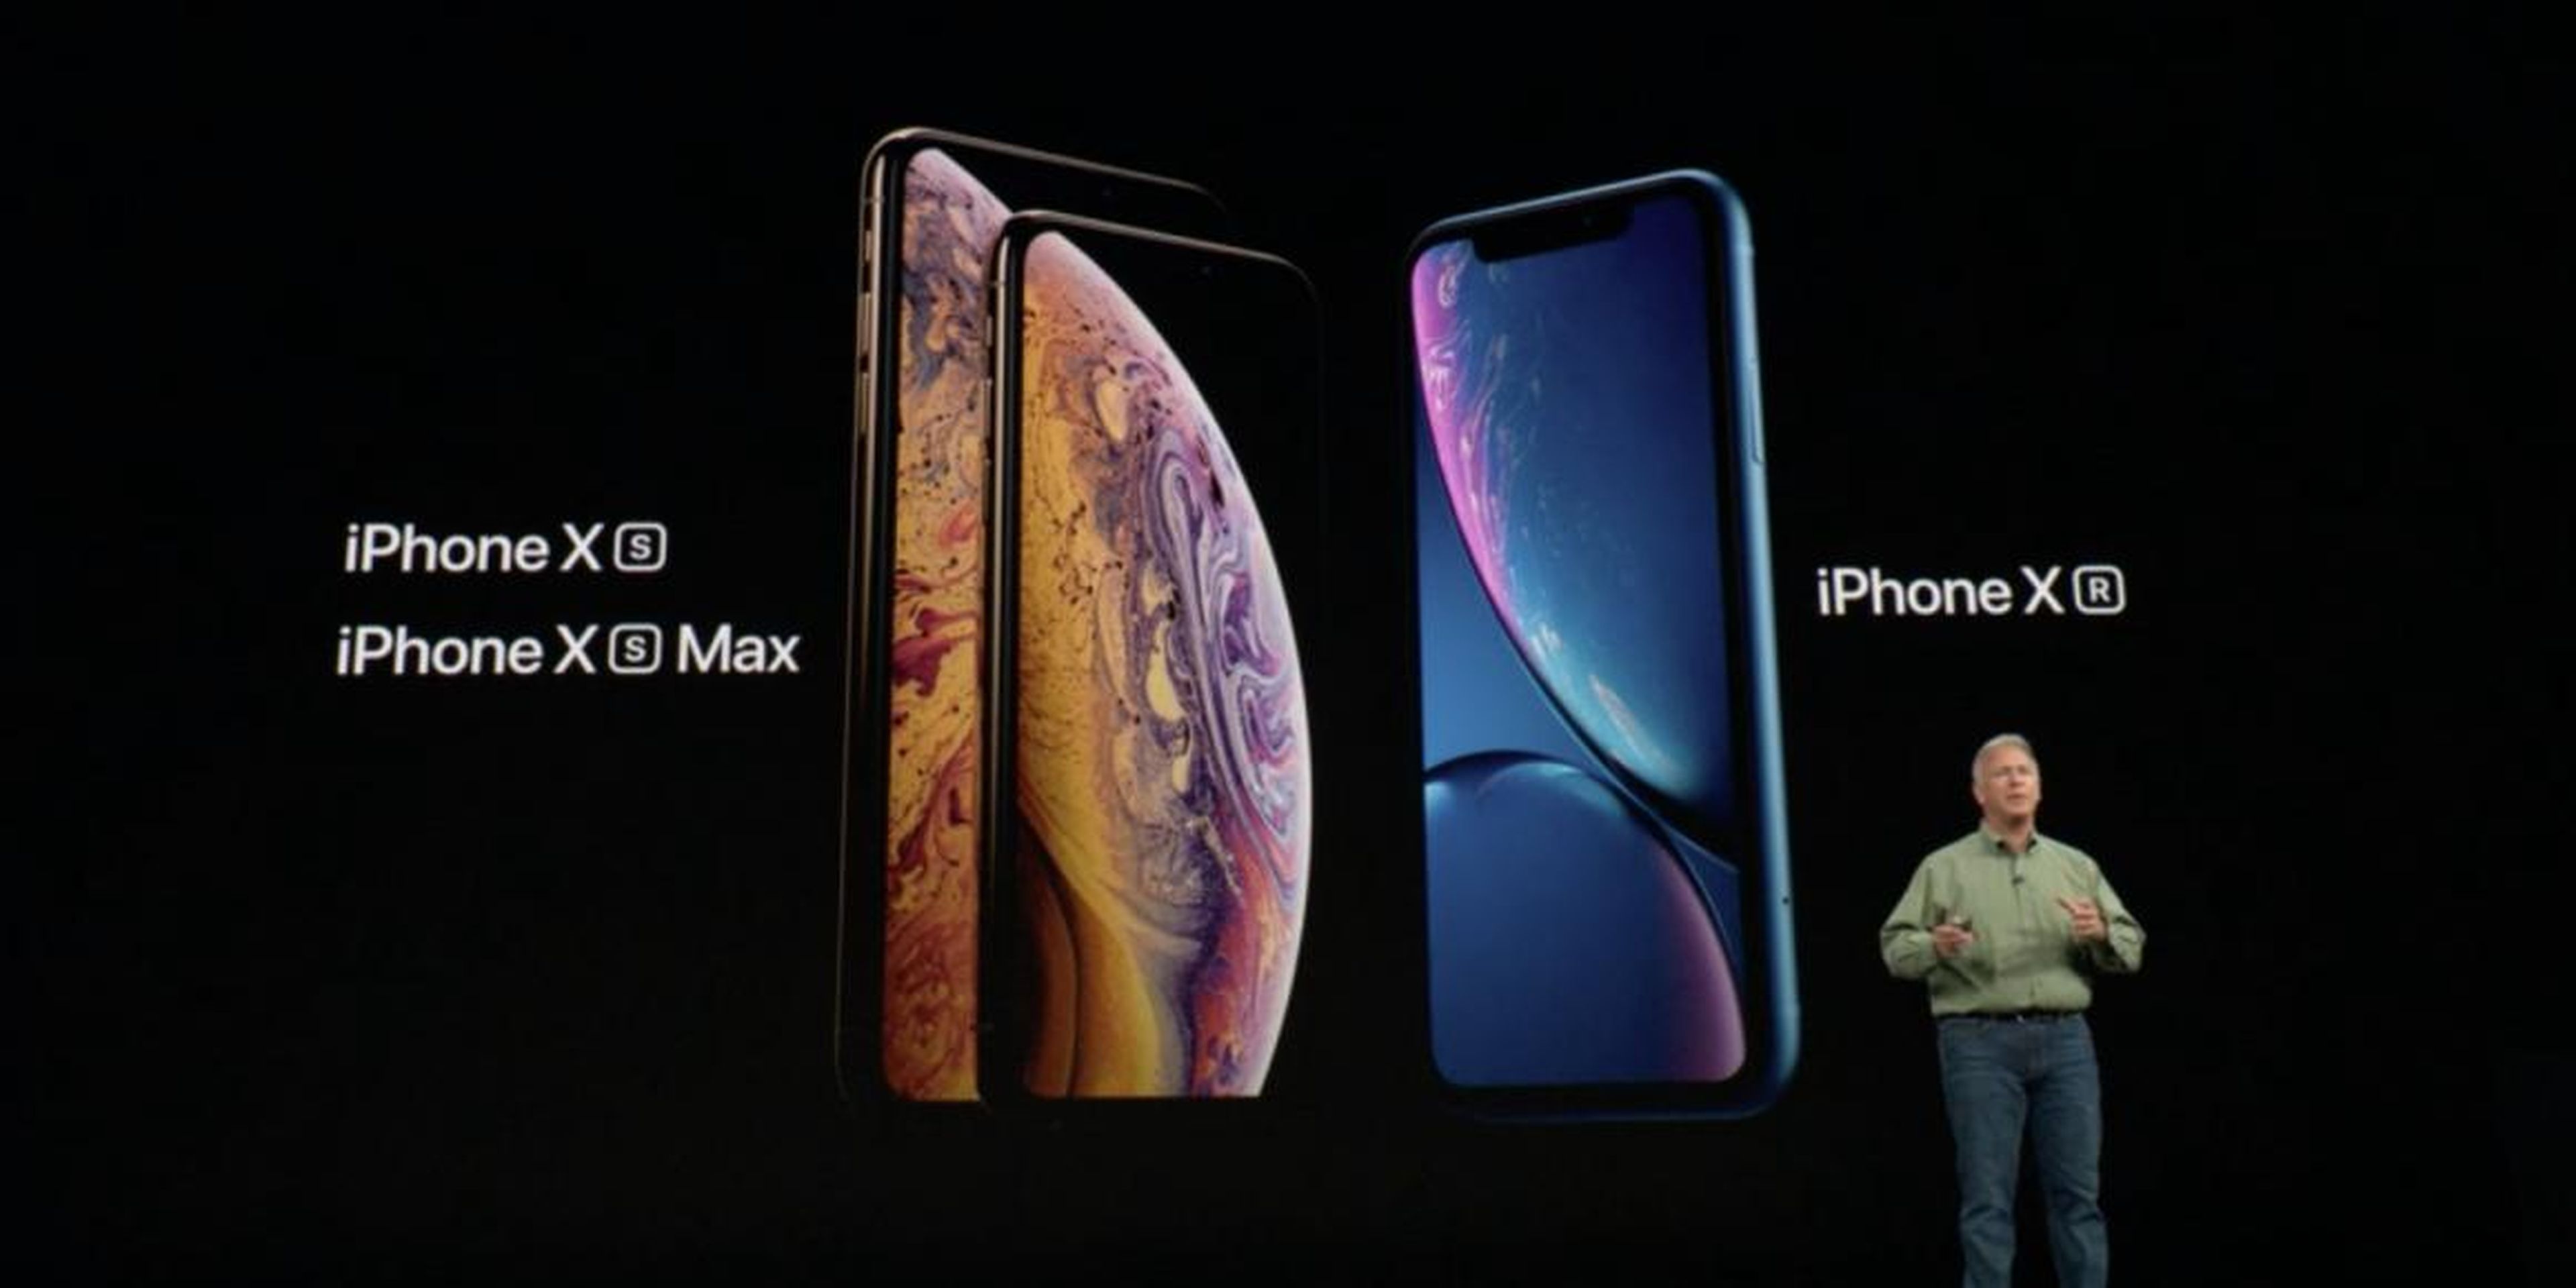 9 reasons you should buy an iPhone XR instead of an iPhone XS